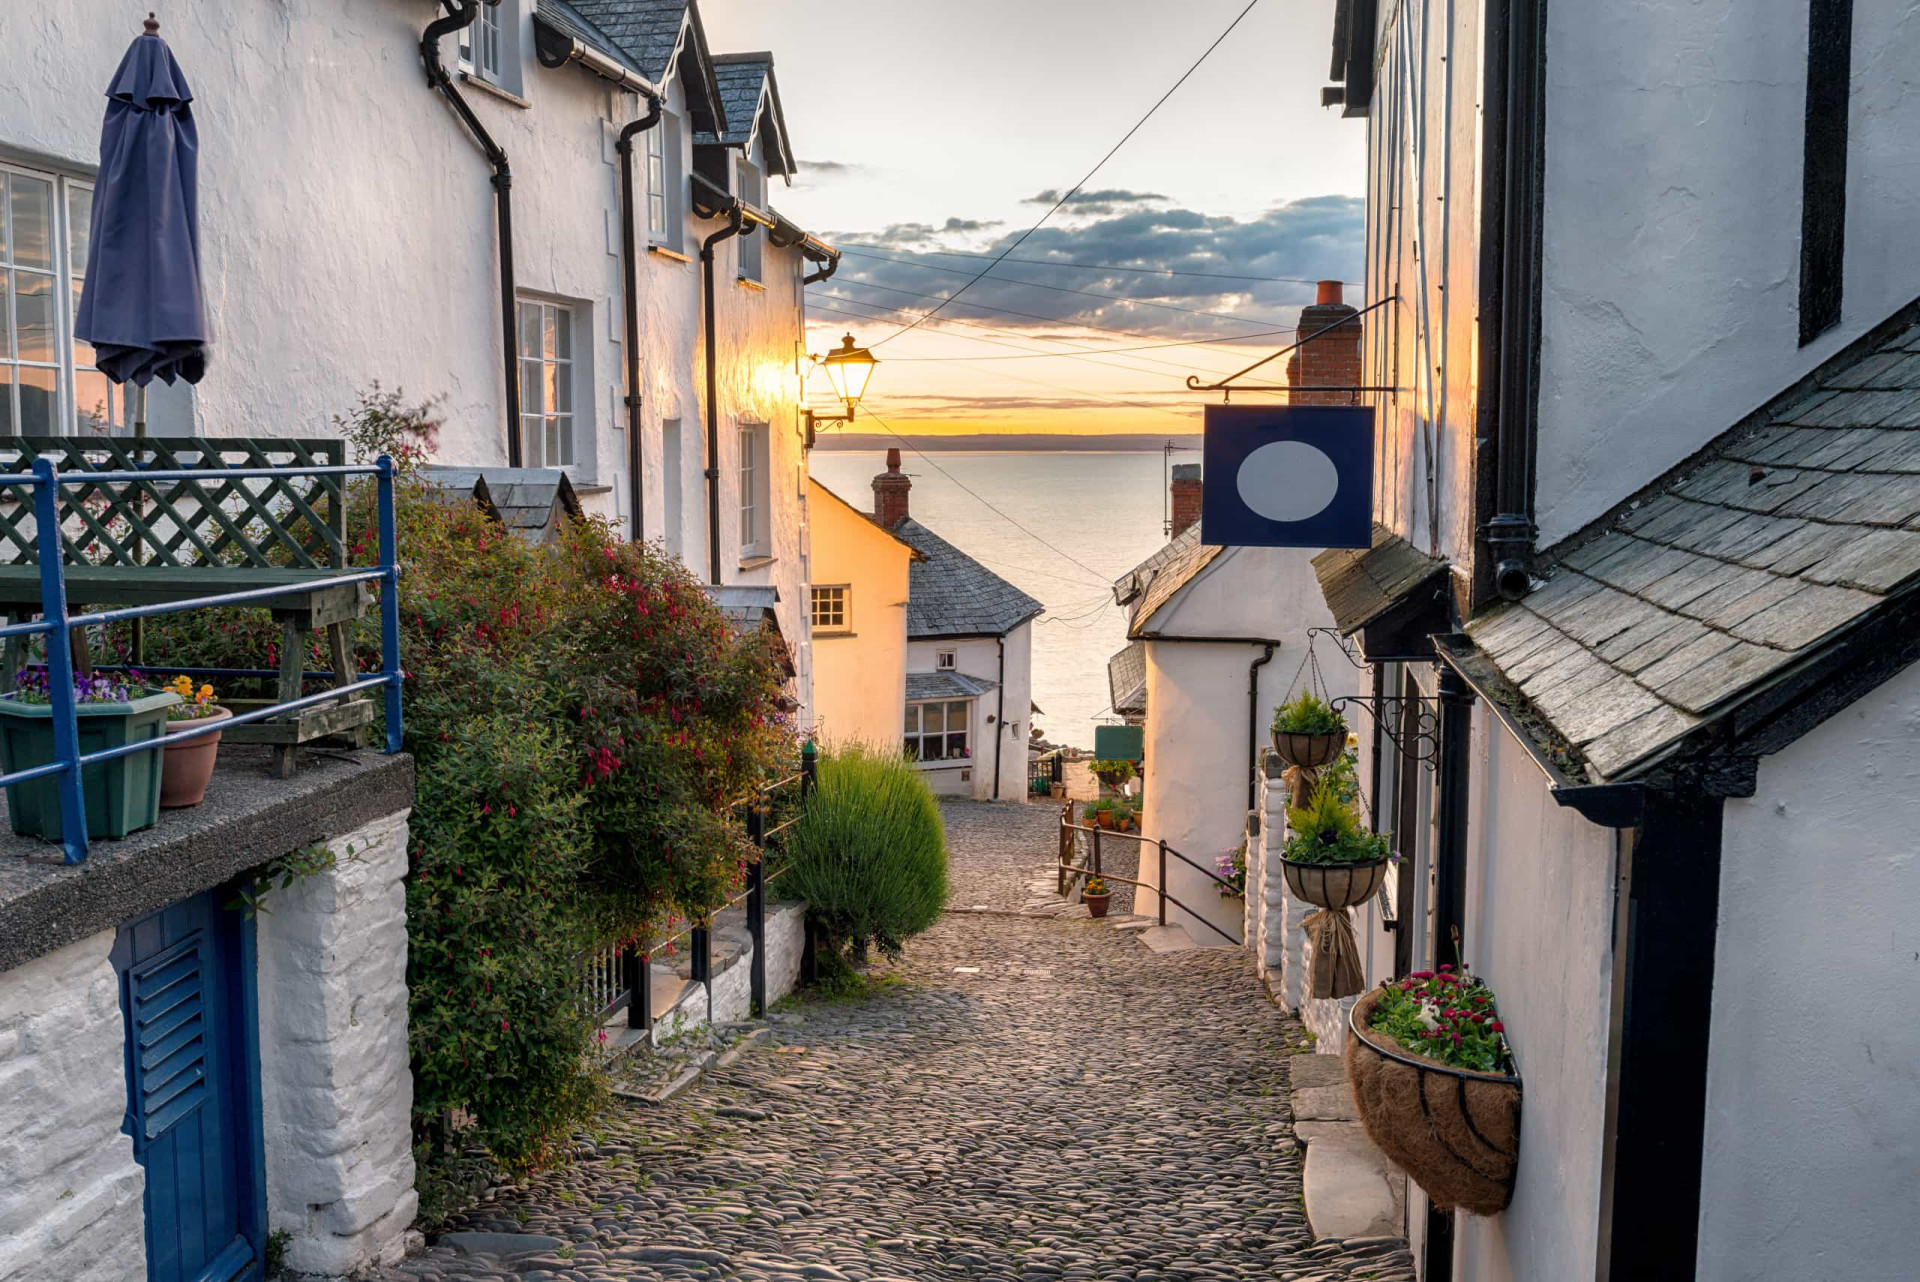 <p>Clovelly in Devon is a very special place to visit. It is extremely serene because no cars are allowed in the town. You can walk along the medieval port and also hike to the highest point on the hill for a spectacular view.</p><p>You may also like:<a href="https://www.starsinsider.com/n/191665?utm_source=msn.com&utm_medium=display&utm_campaign=referral_description&utm_content=471299v4en-en"> British celebrities who you won't believe are related!</a></p>